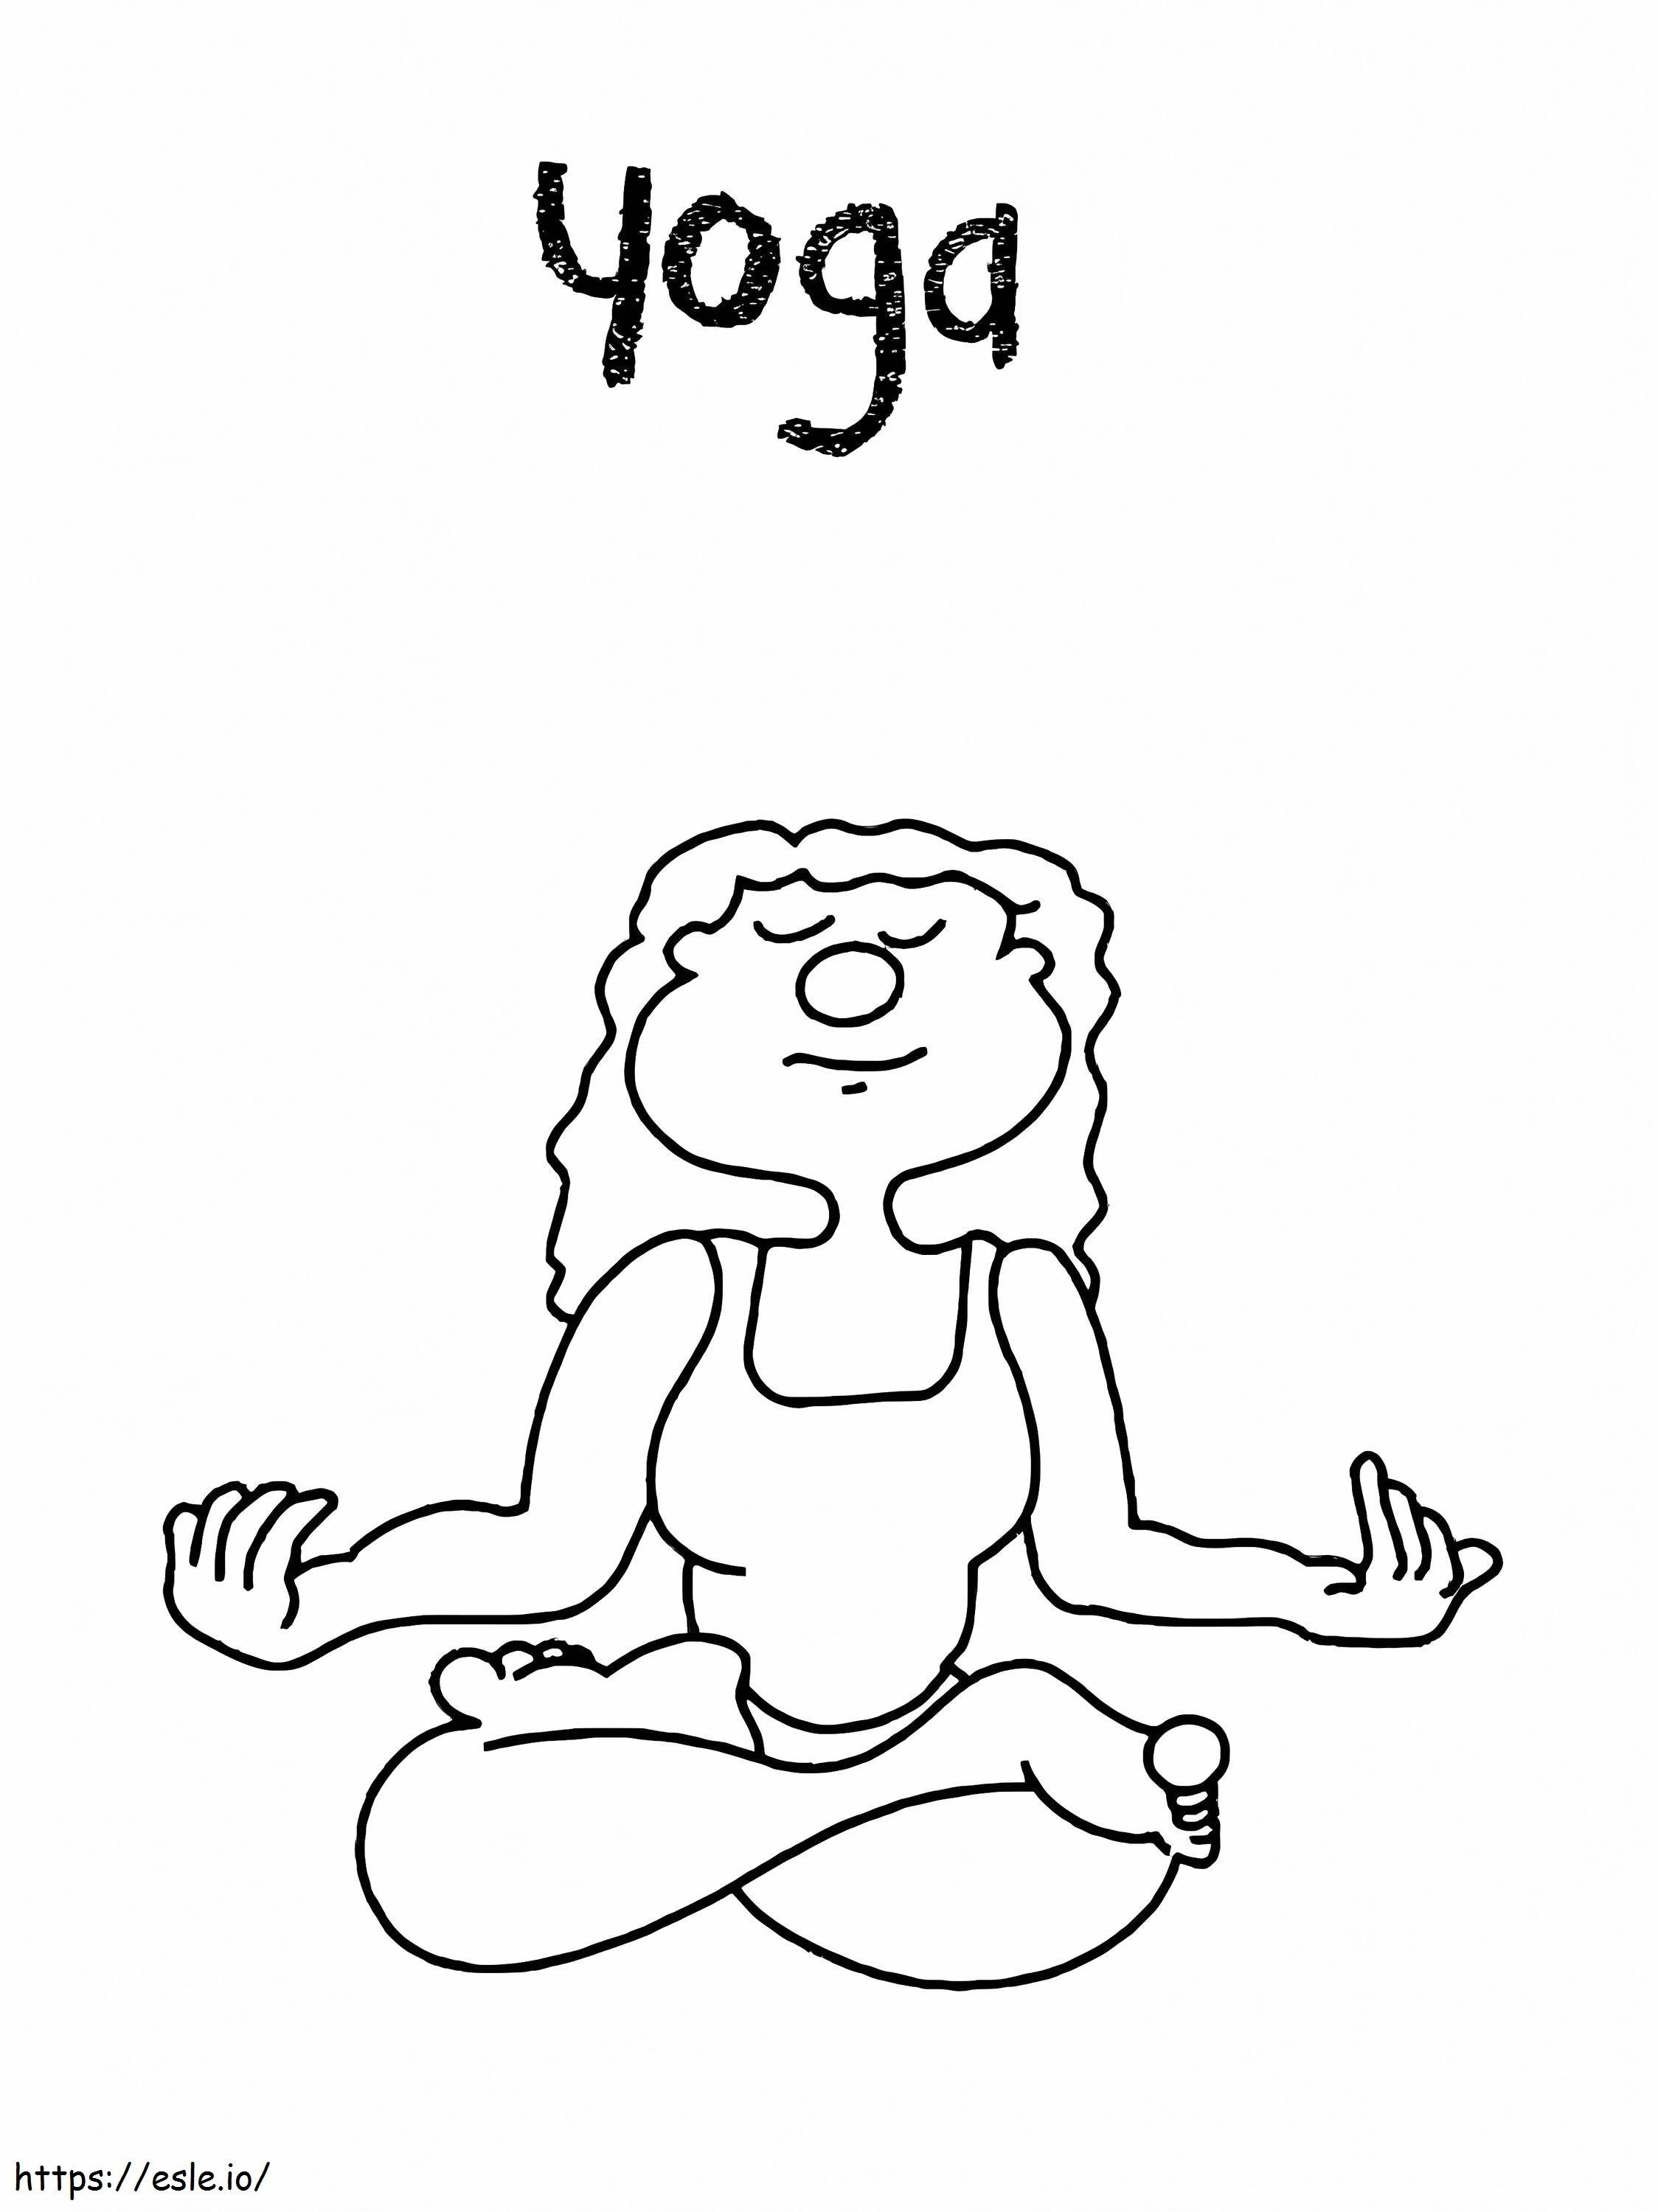 Doing Yoga coloring page